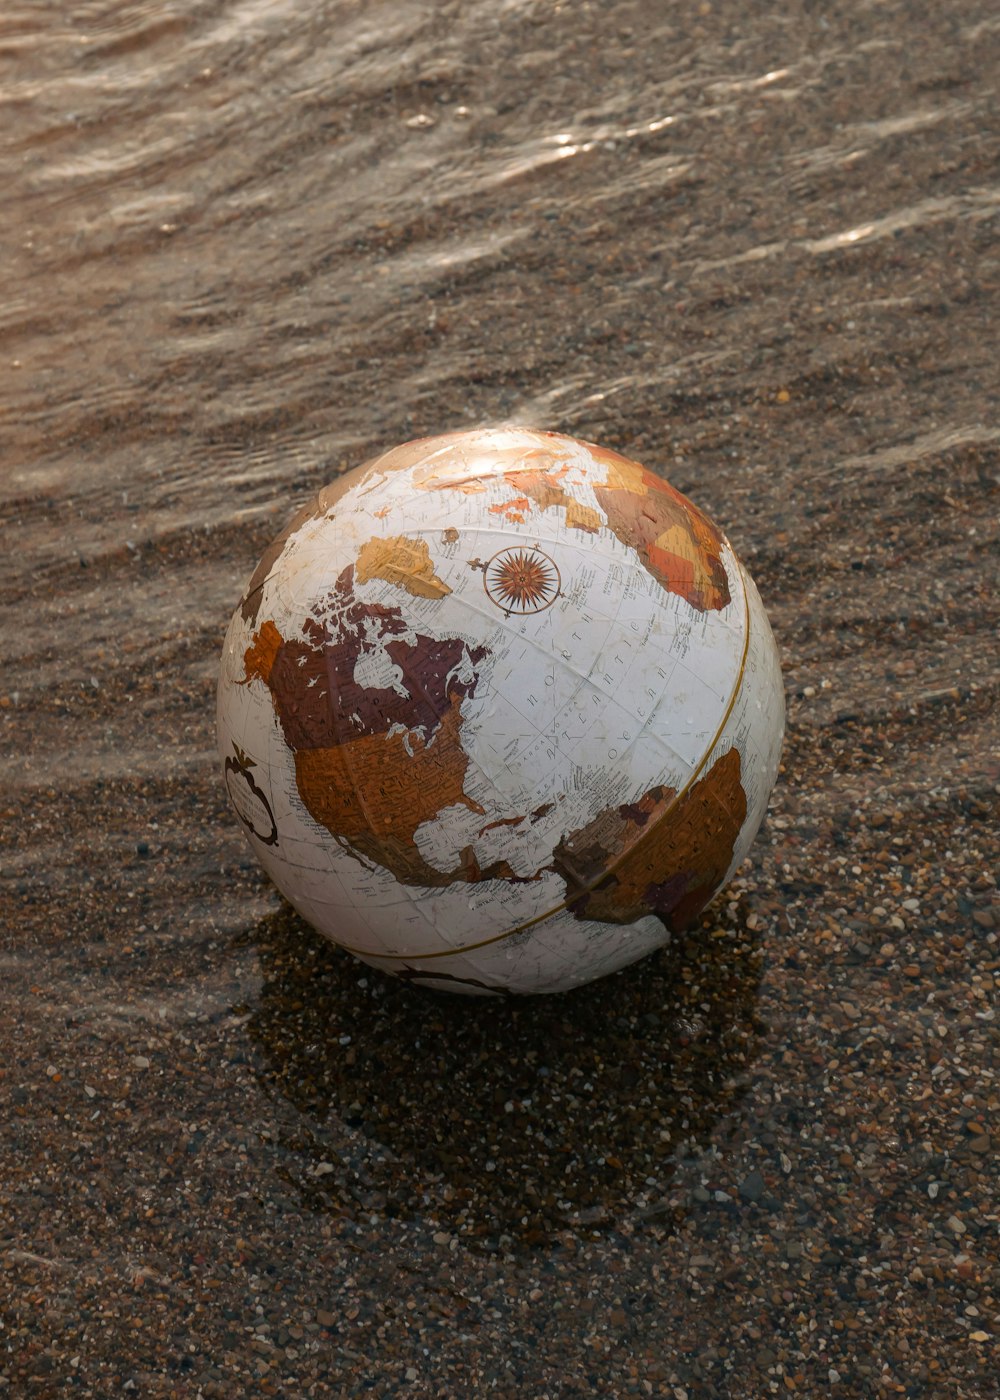 a worn out soccer ball sitting in the sand